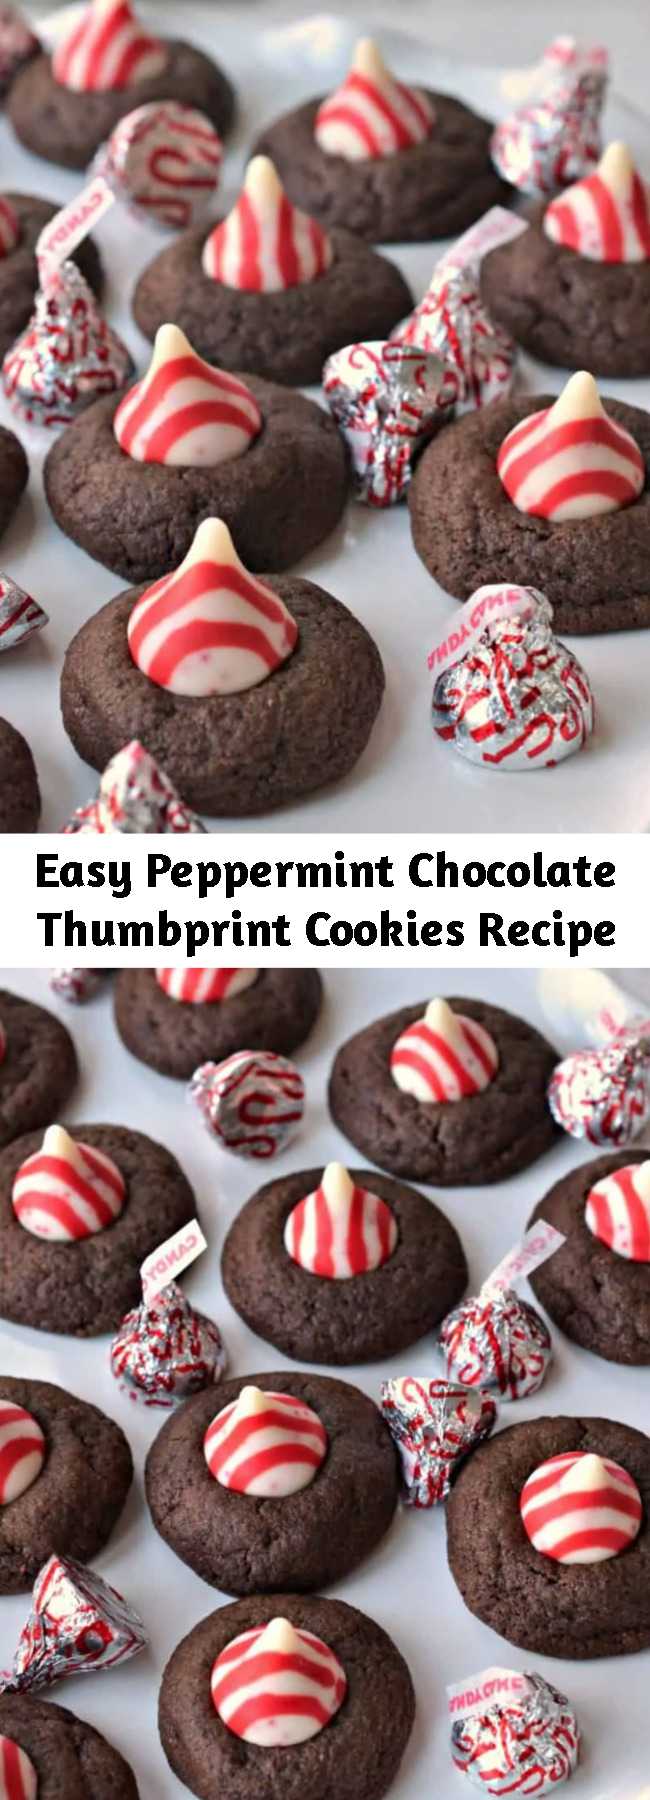 Easy Peppermint Chocolate Thumbprint Cookies Recipe - Easy Peppermint Chocolate Thumbprint Cookies are delicious buttery chocolate treats that are baked to perfection and topped with a colorful red and white chocolate peppermint kiss.